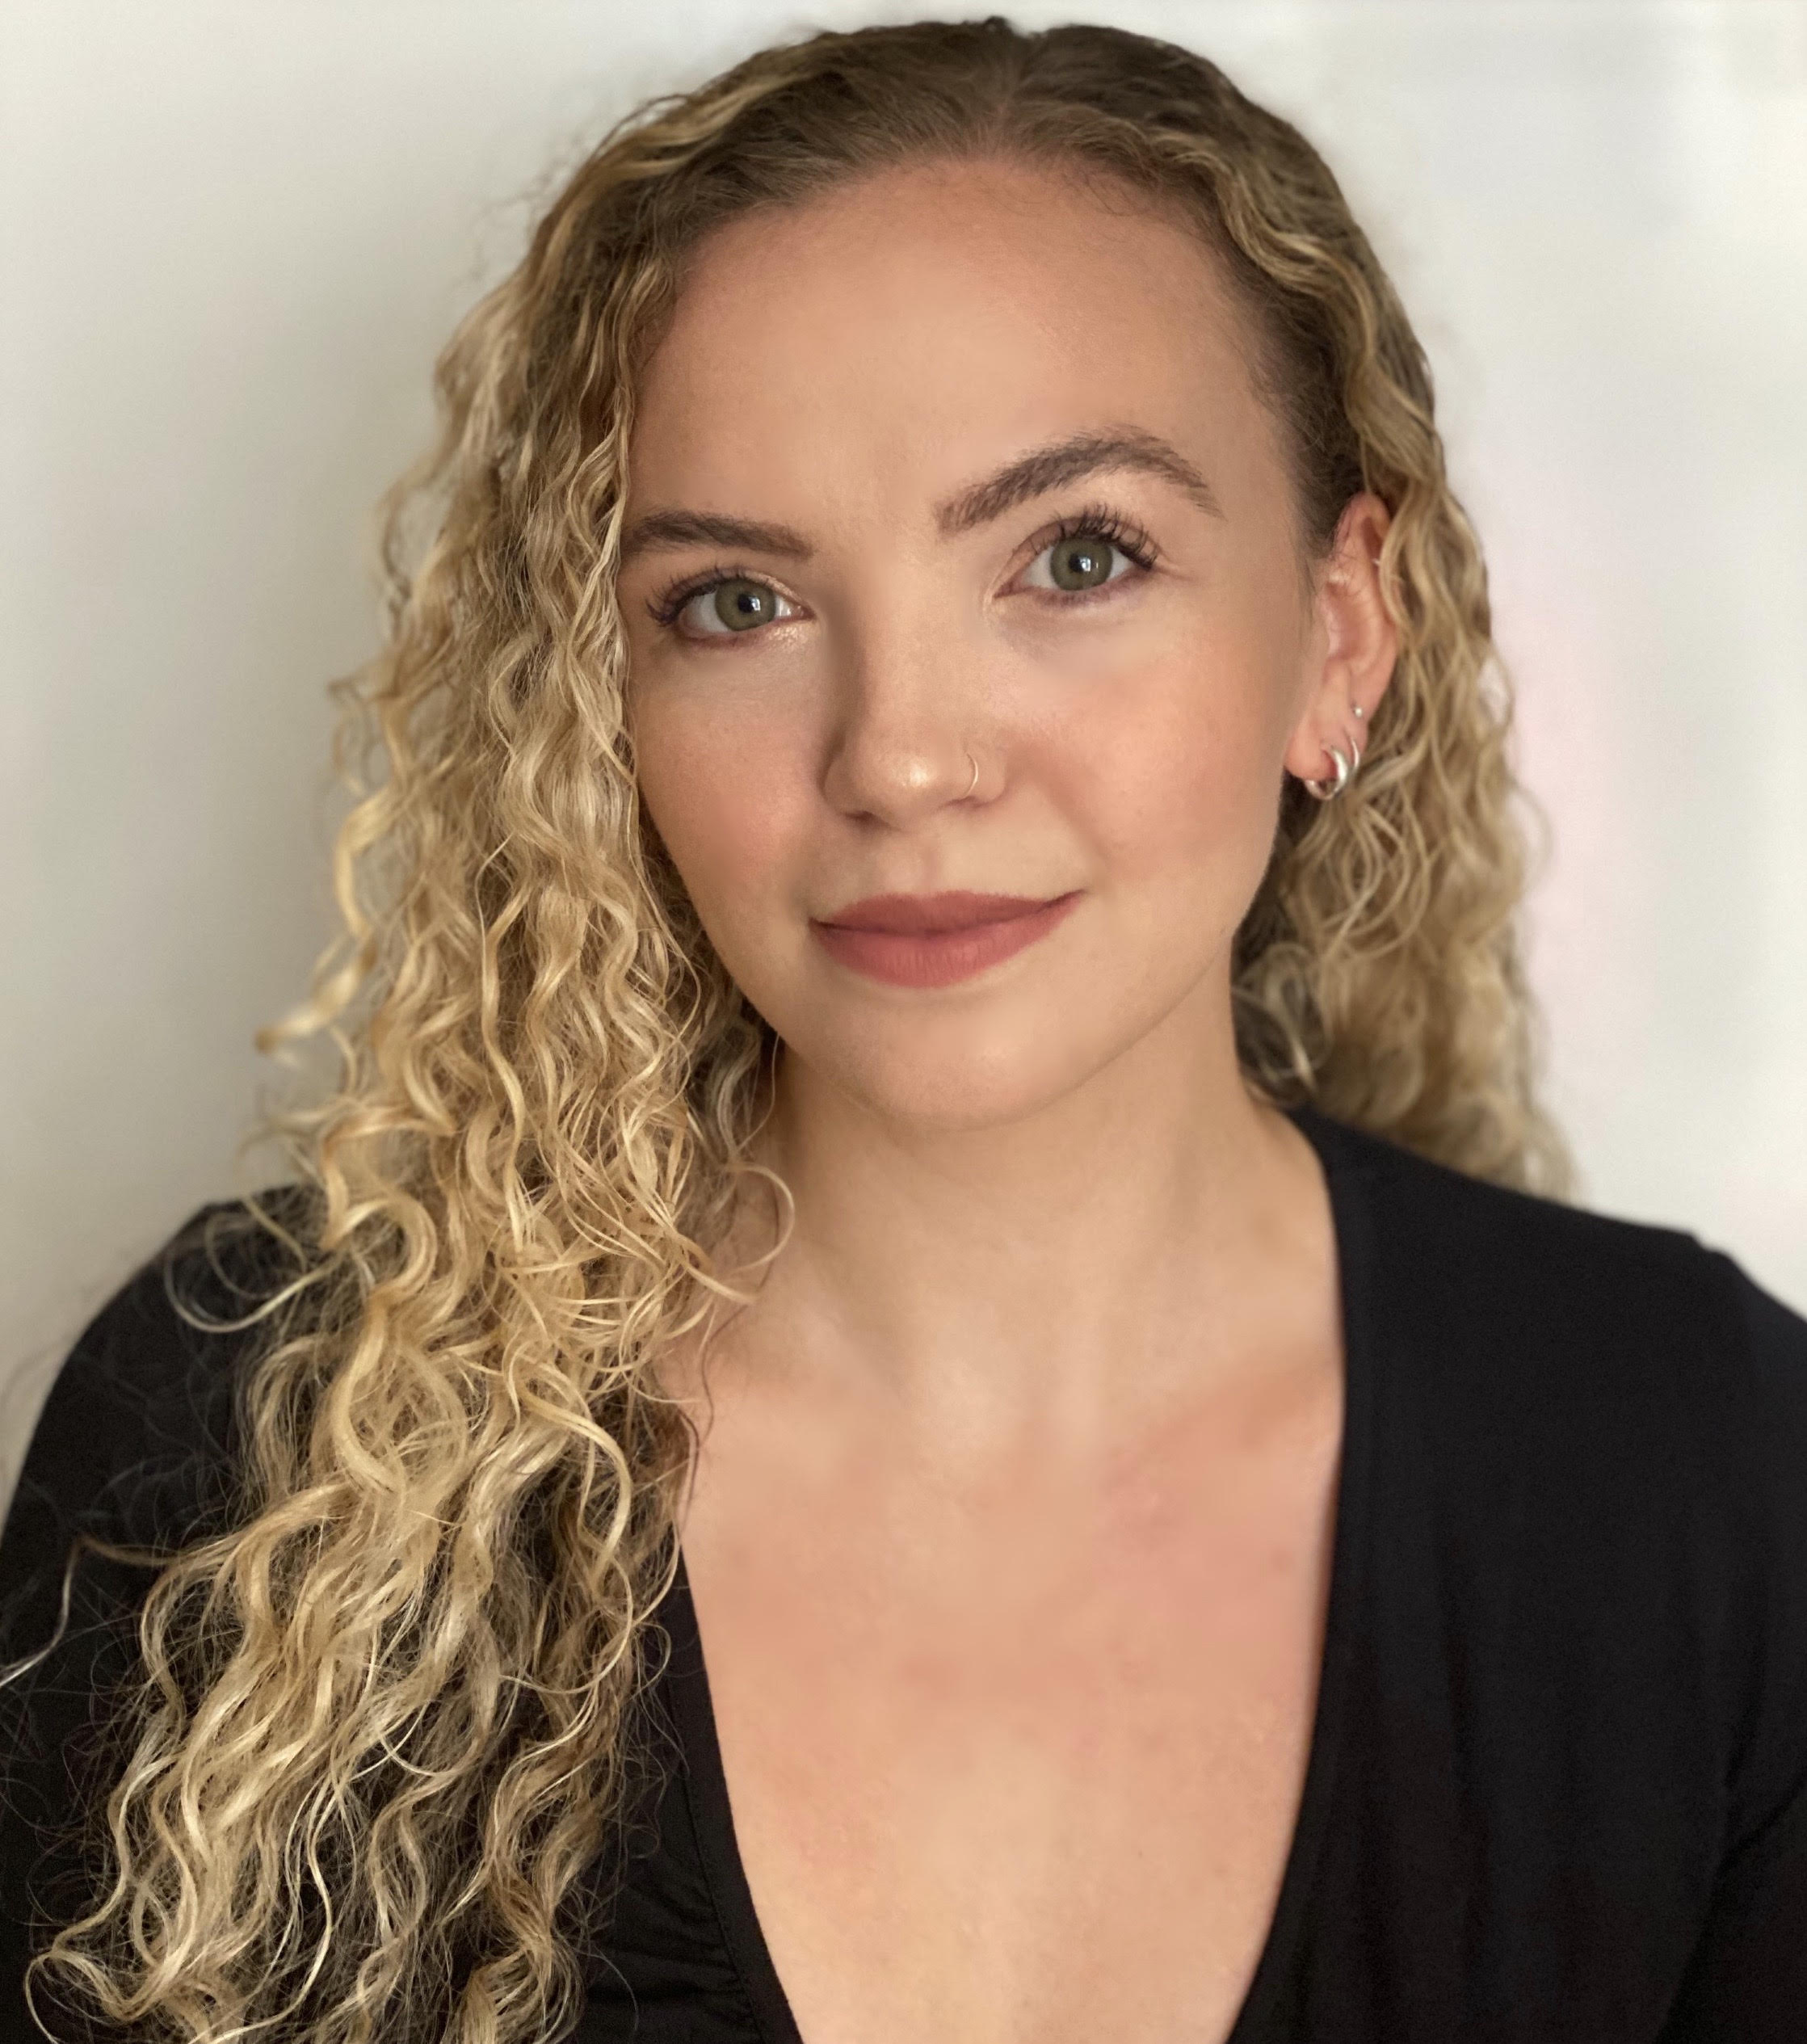 Interview with music PR specialist Lydia Reed